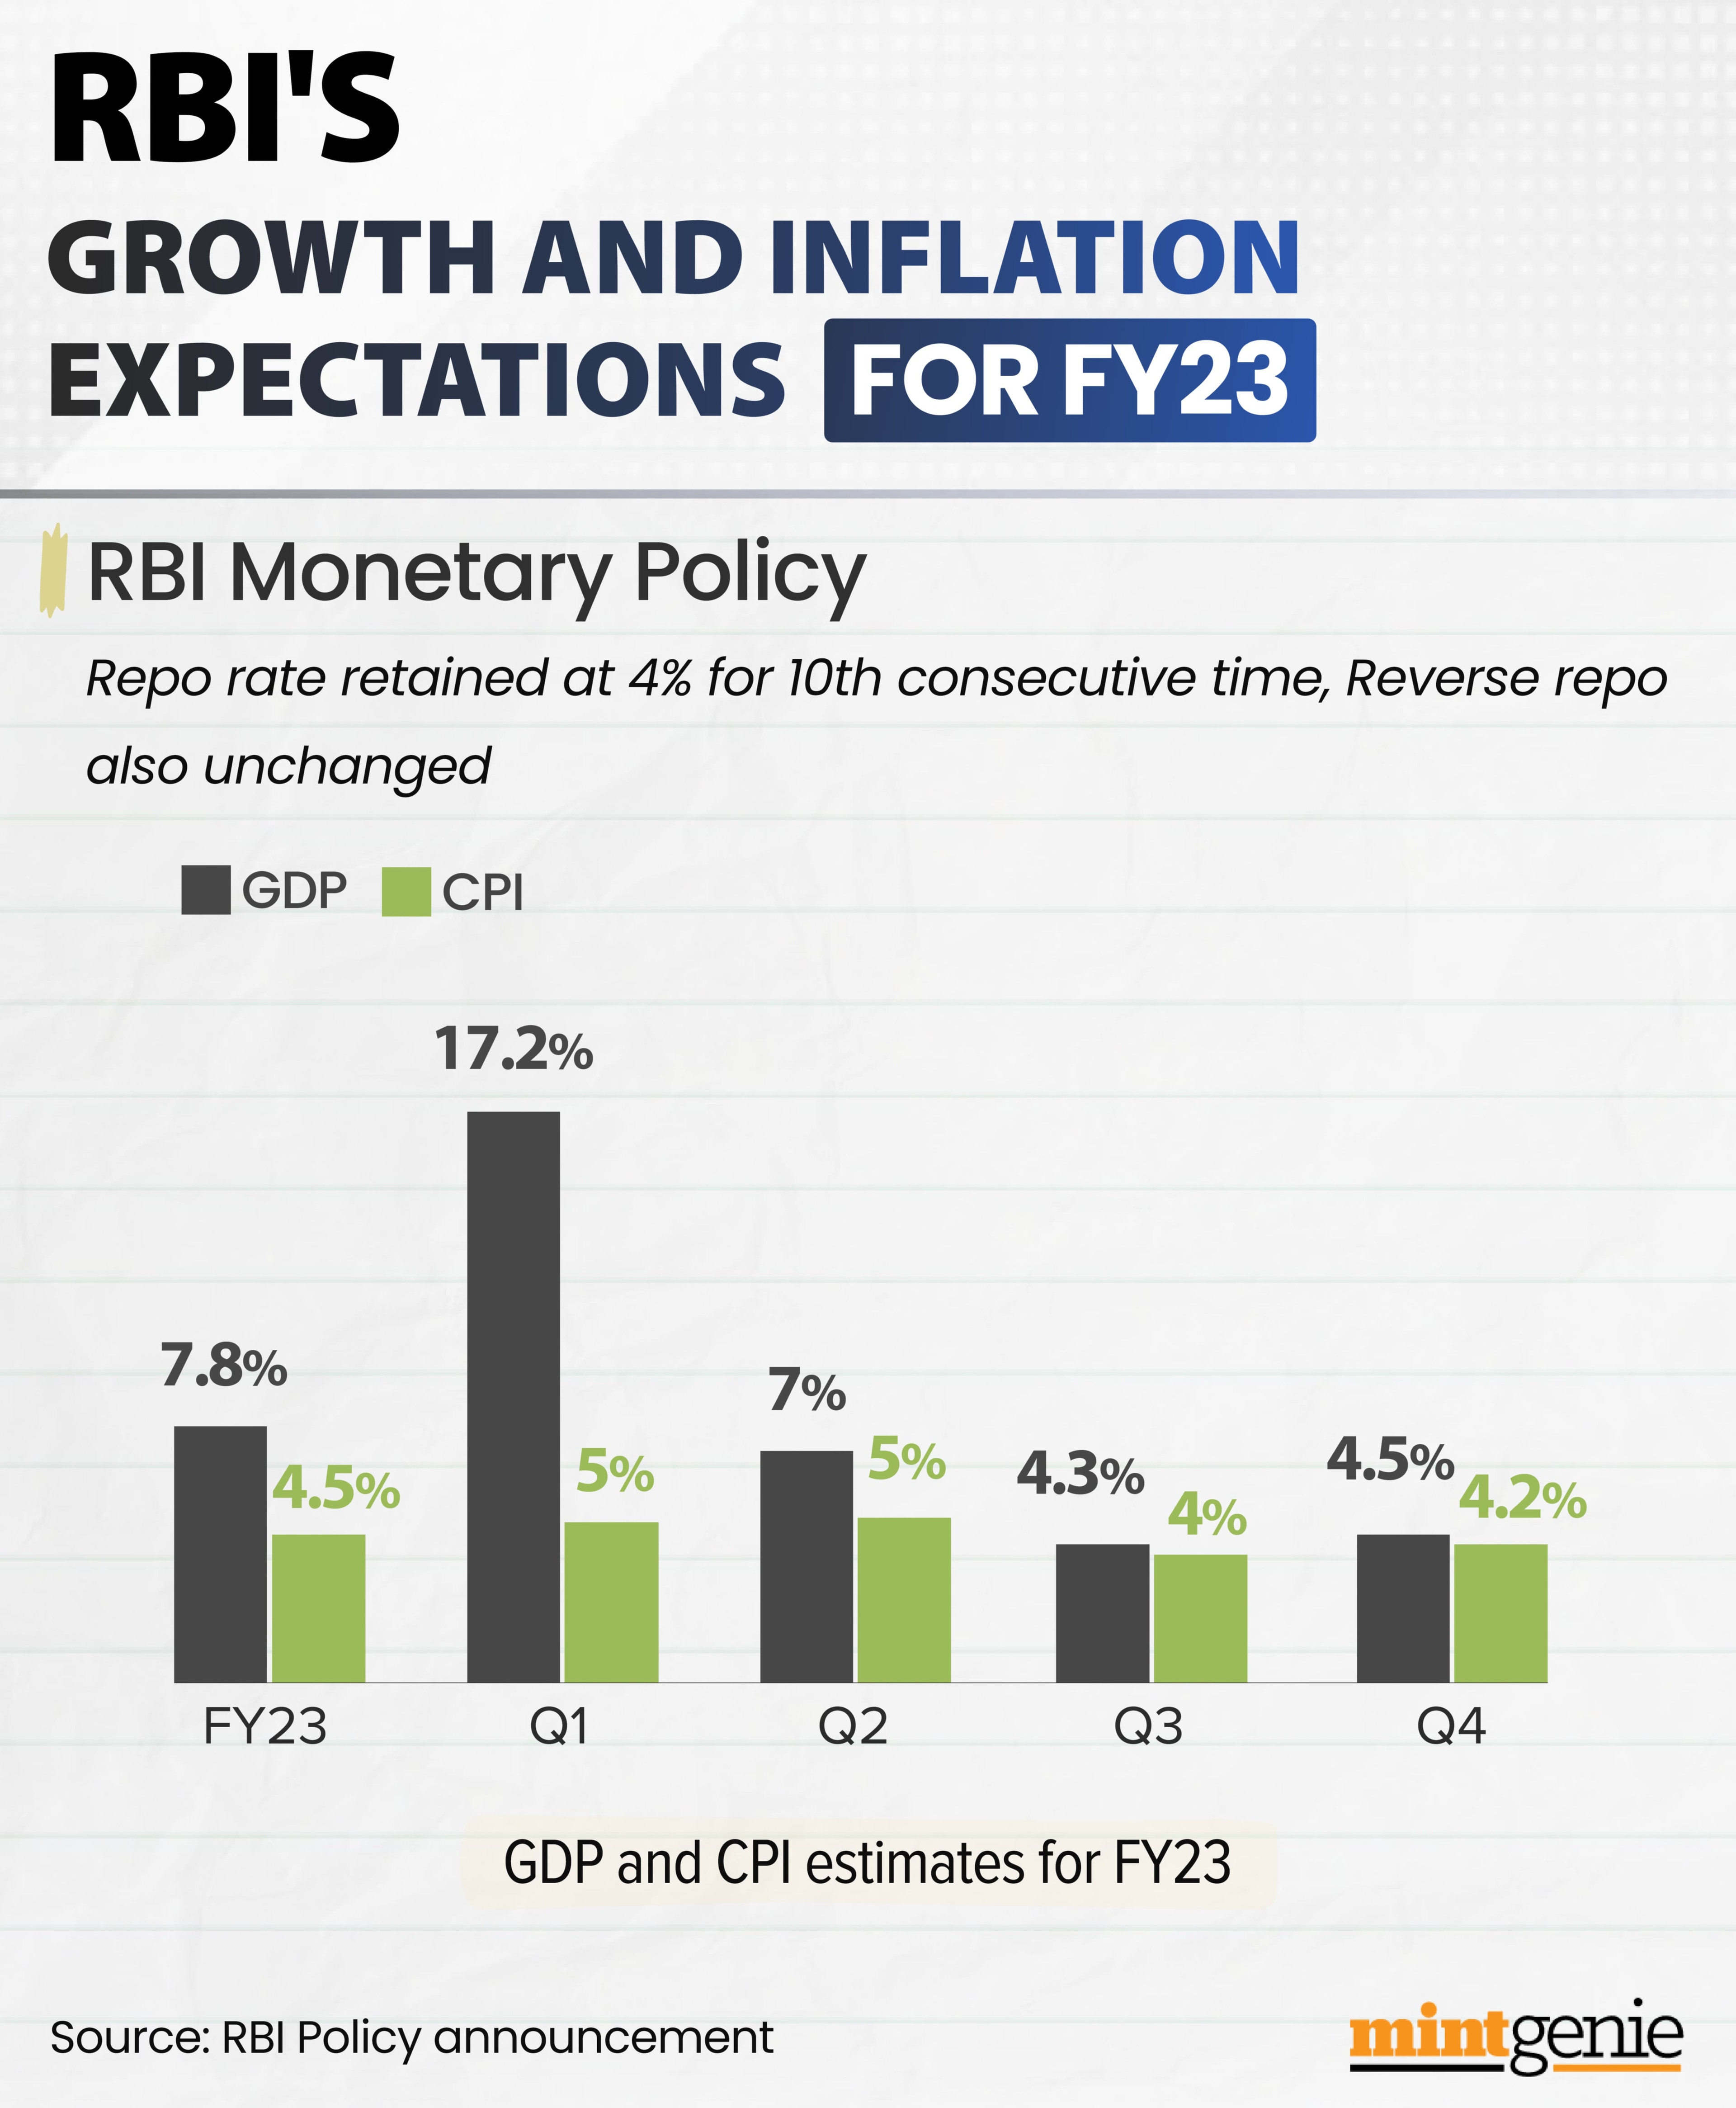 RBI's growth and inflation expectations for FY23